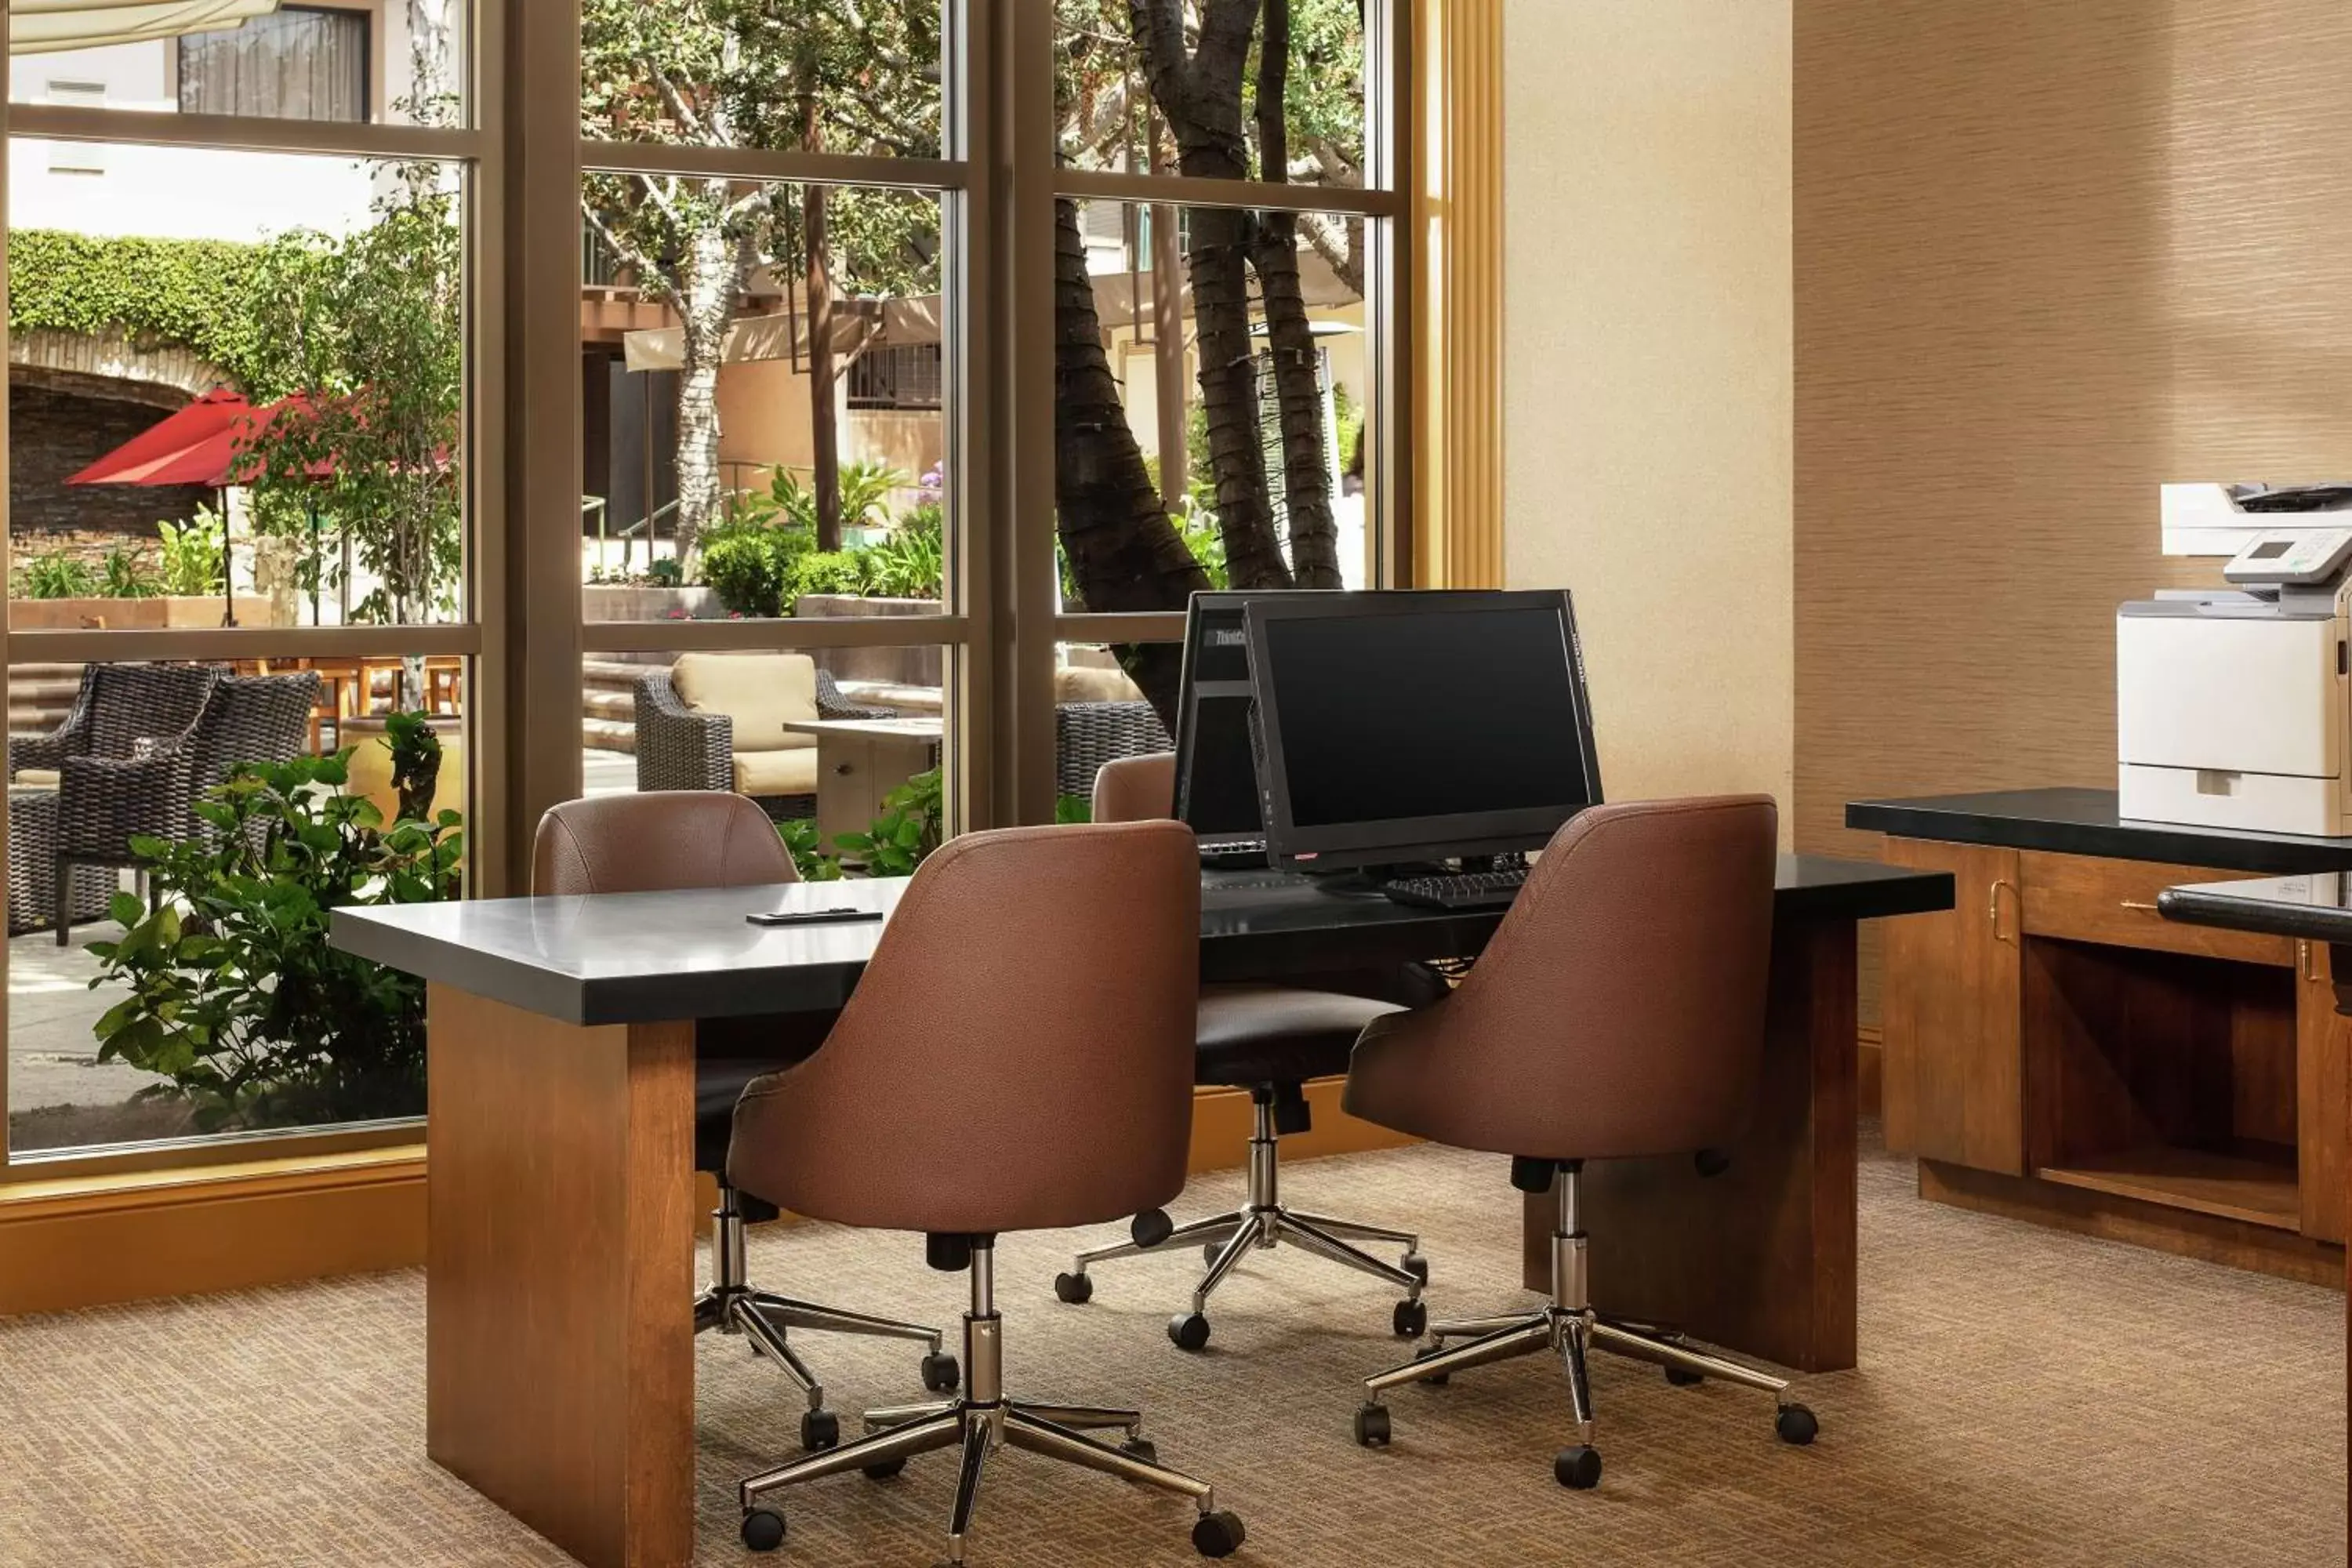 Business facilities in DoubleTree by Hilton Claremont